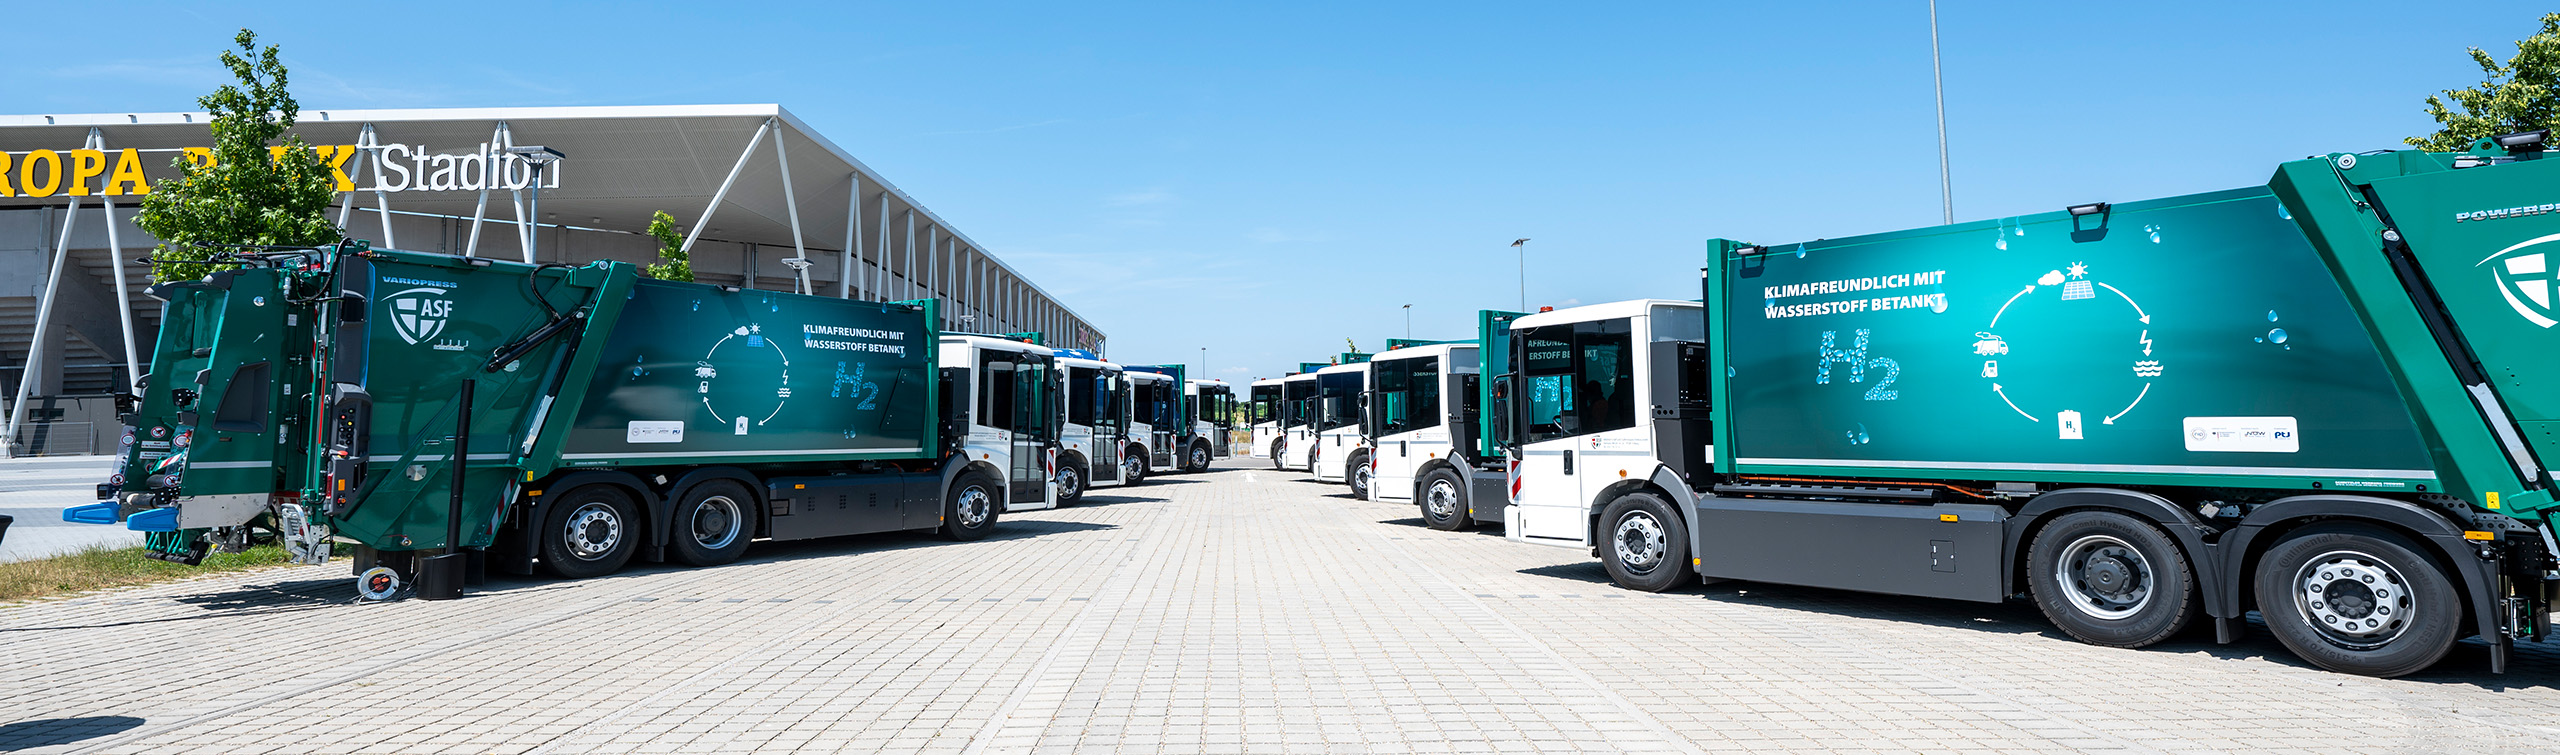 ASF expands fleet to nine fuel cell vehicles